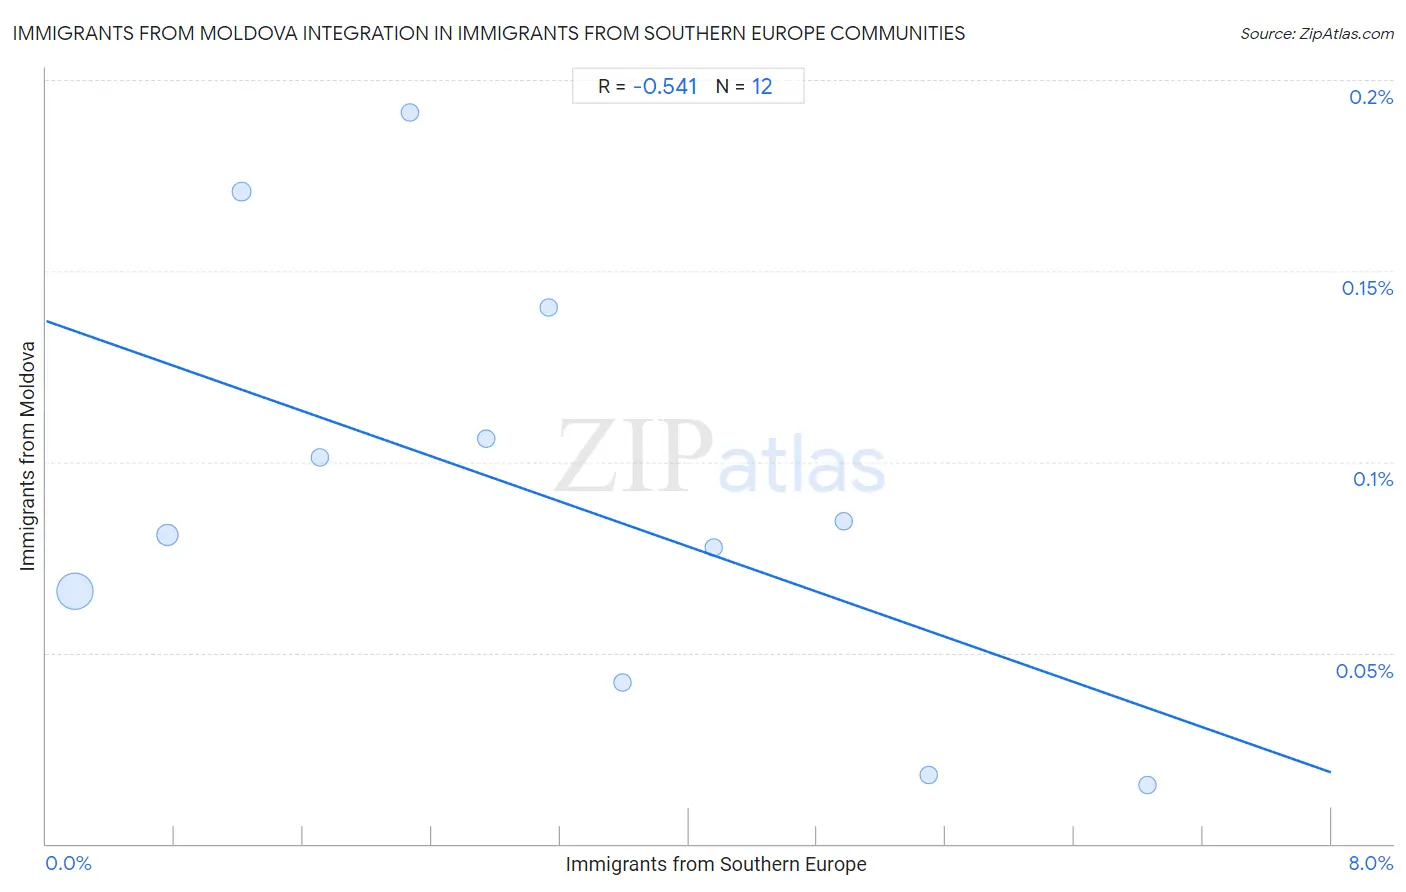 Immigrants from Southern Europe Integration in Immigrants from Moldova Communities